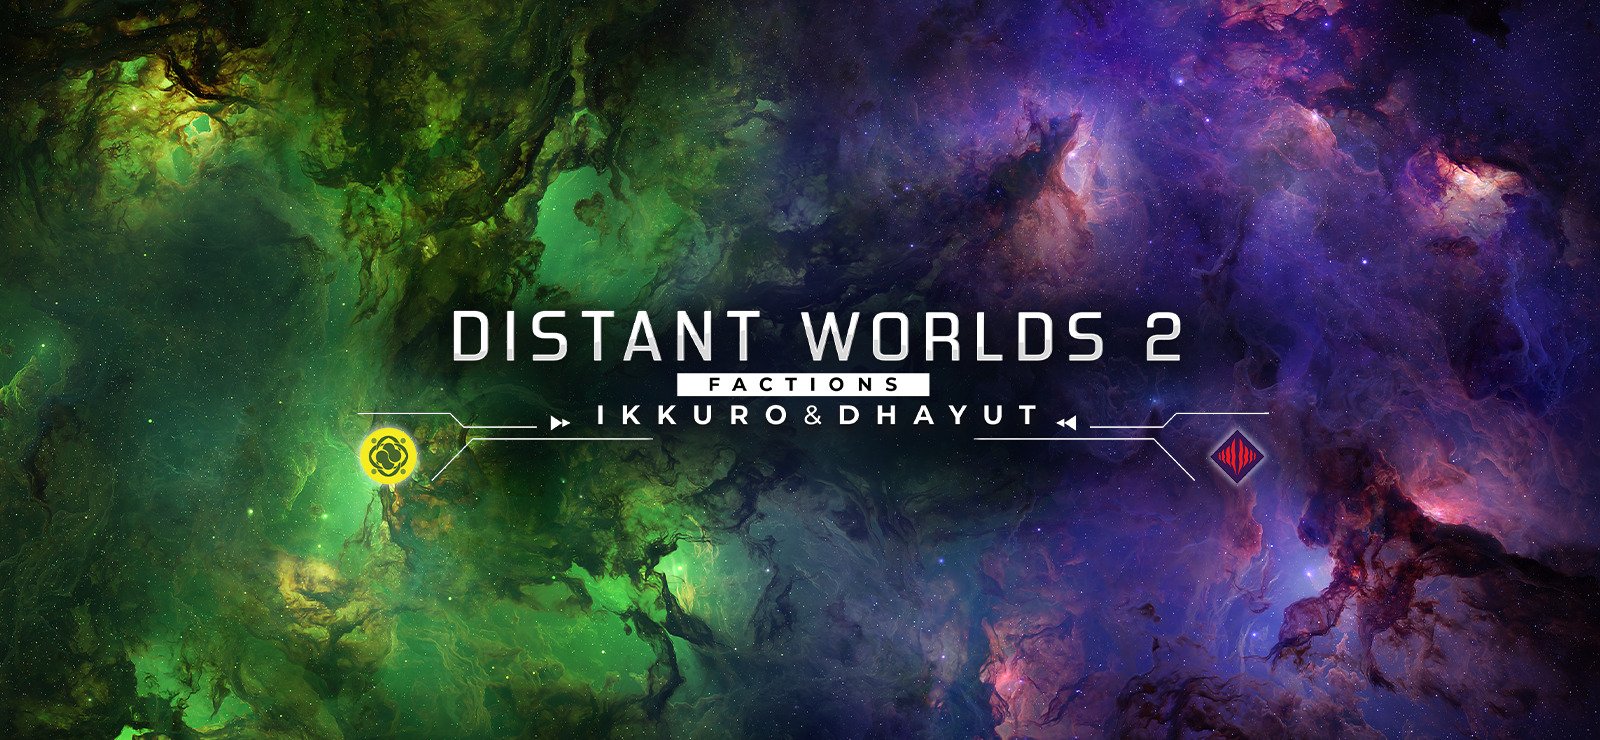 Distant Worlds 2 Factions Ikkuro and Dhayut 7